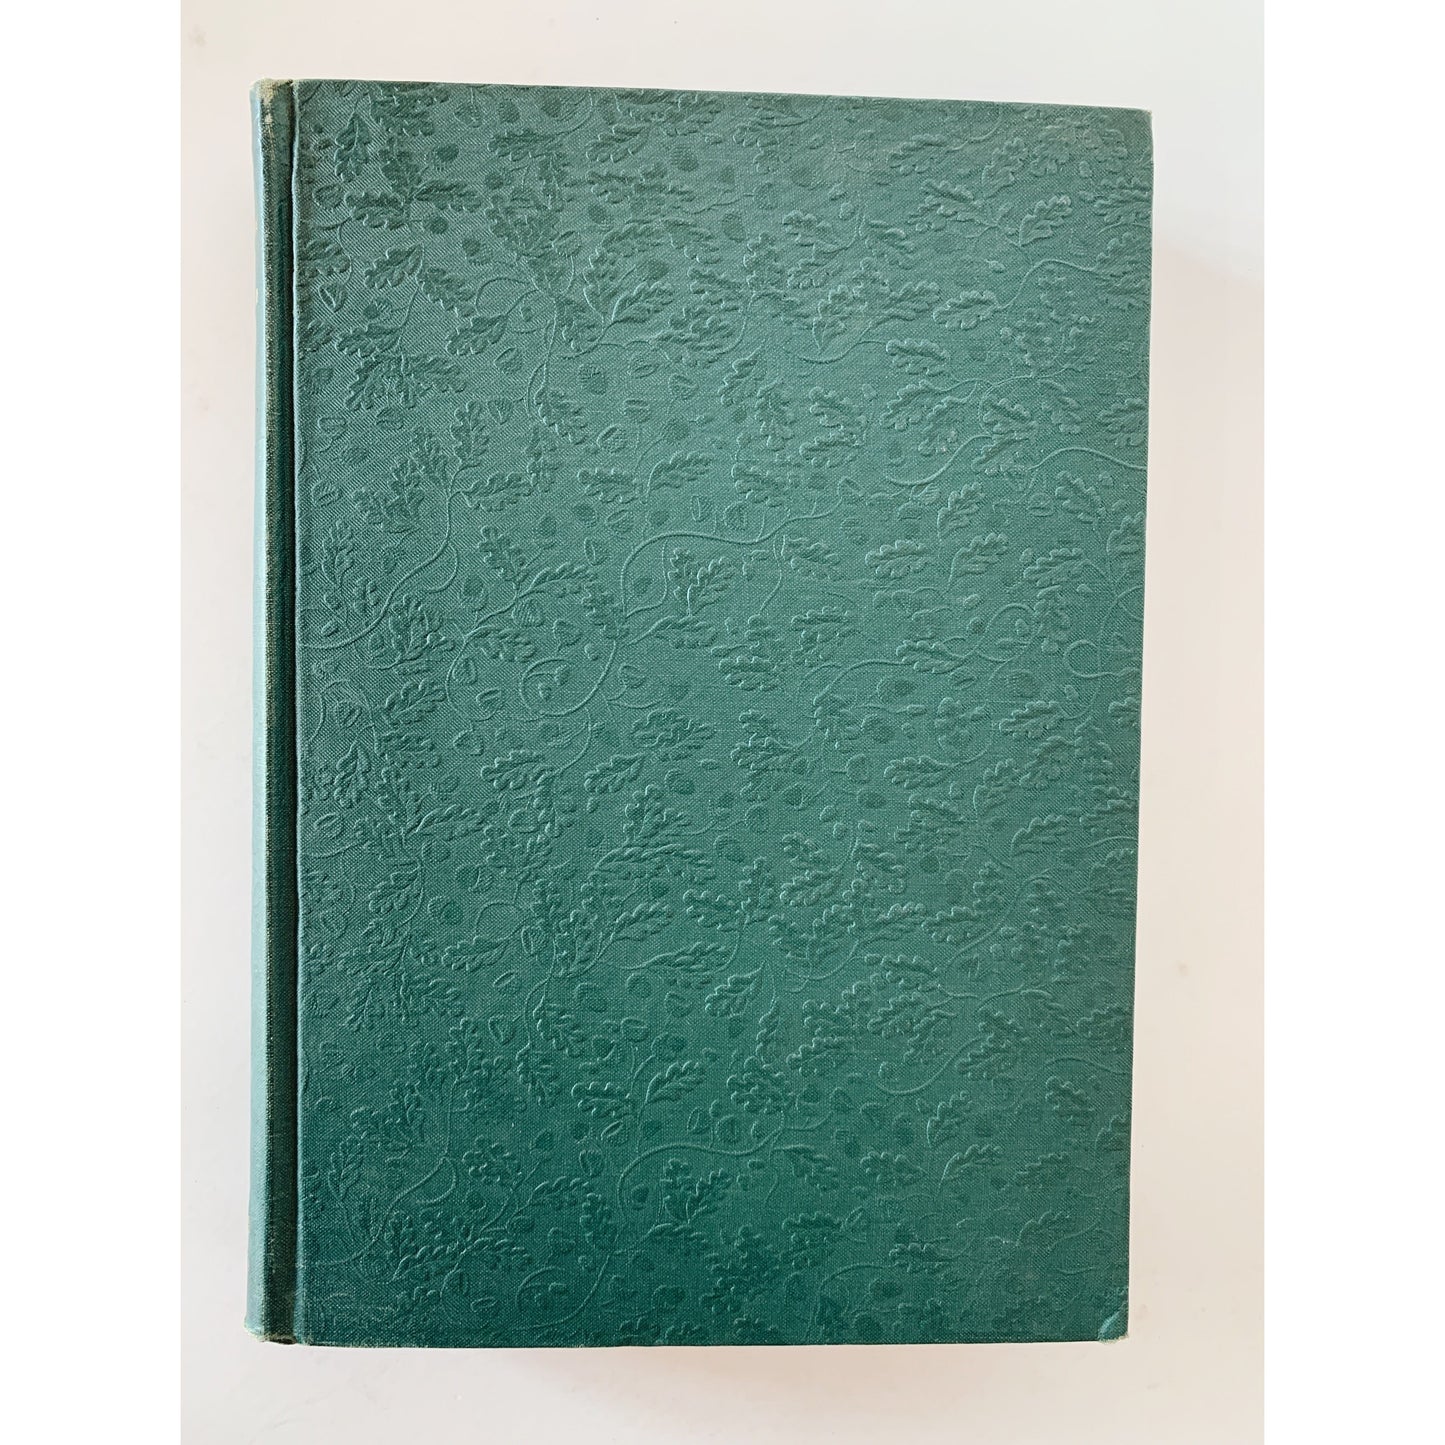 The Flowering of New England, Limited Editions Club, 1941, Signed